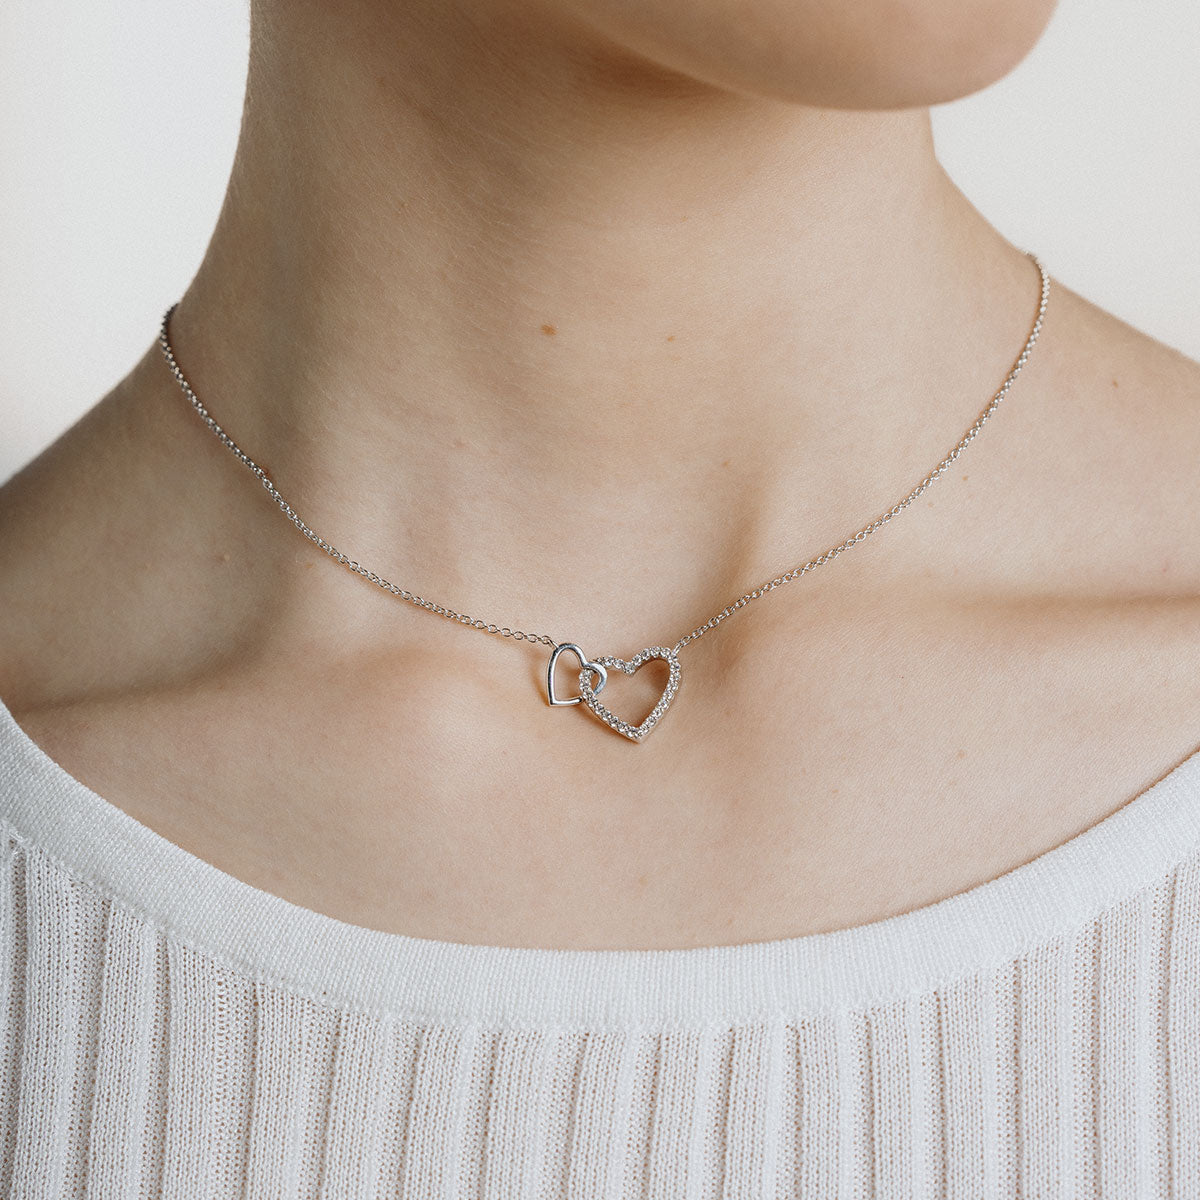 Entwined Heart Necklaces | Love necklace, Lovers necklace, Pendant